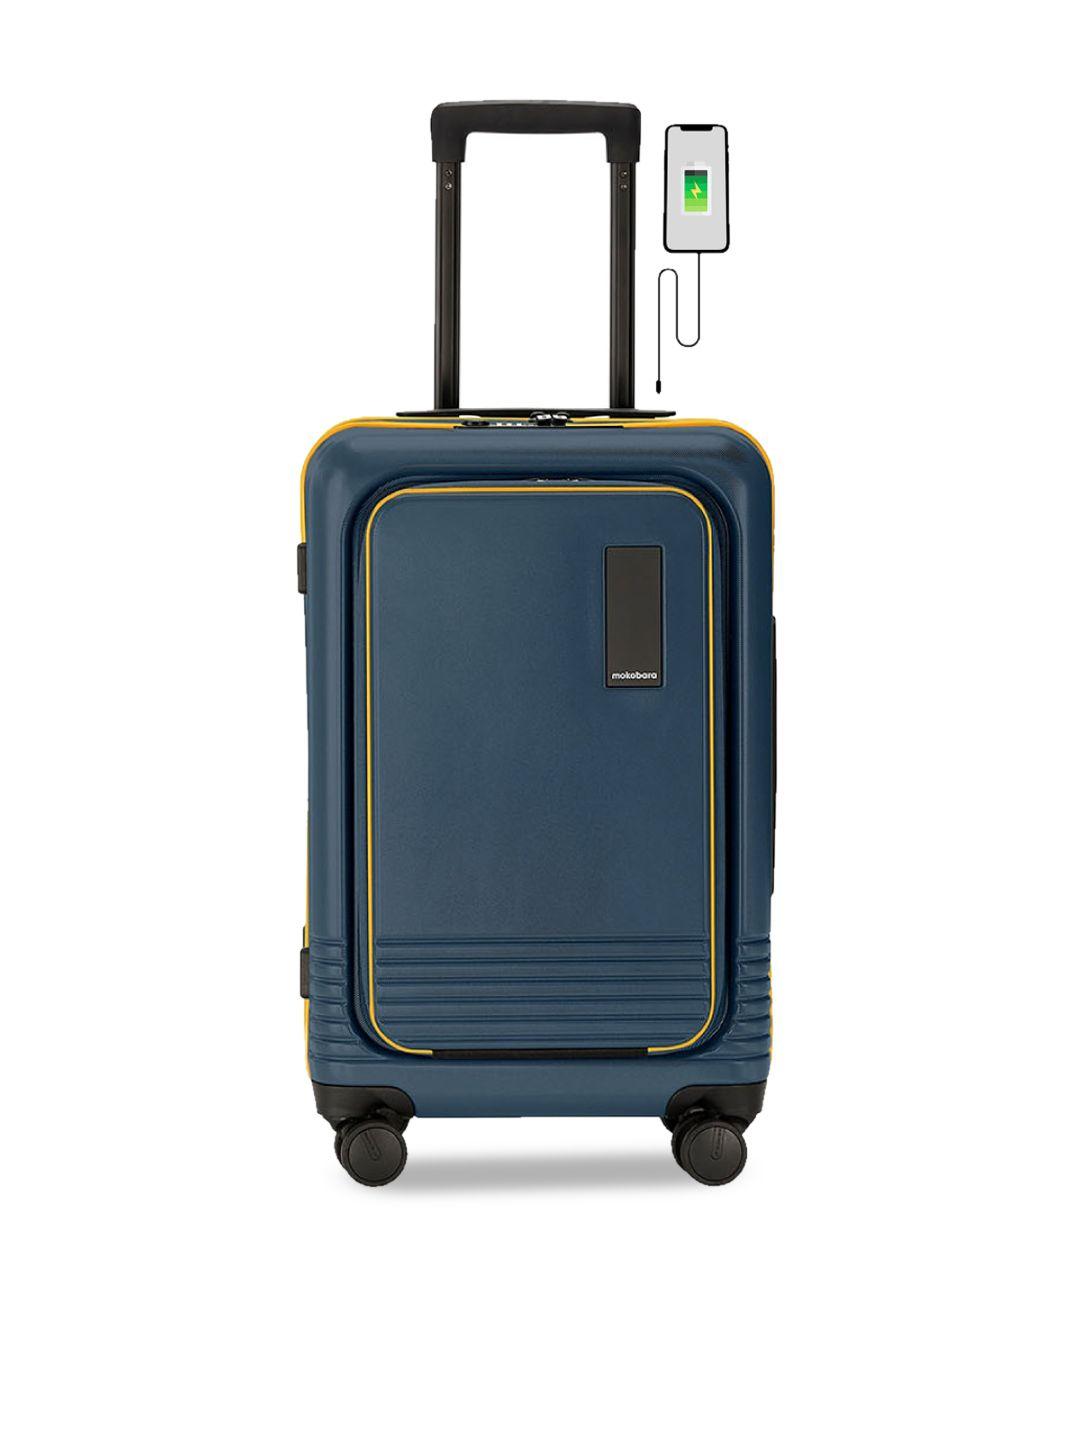 mokobara usb charging point on the top hard-sided cabin trolley suitcase